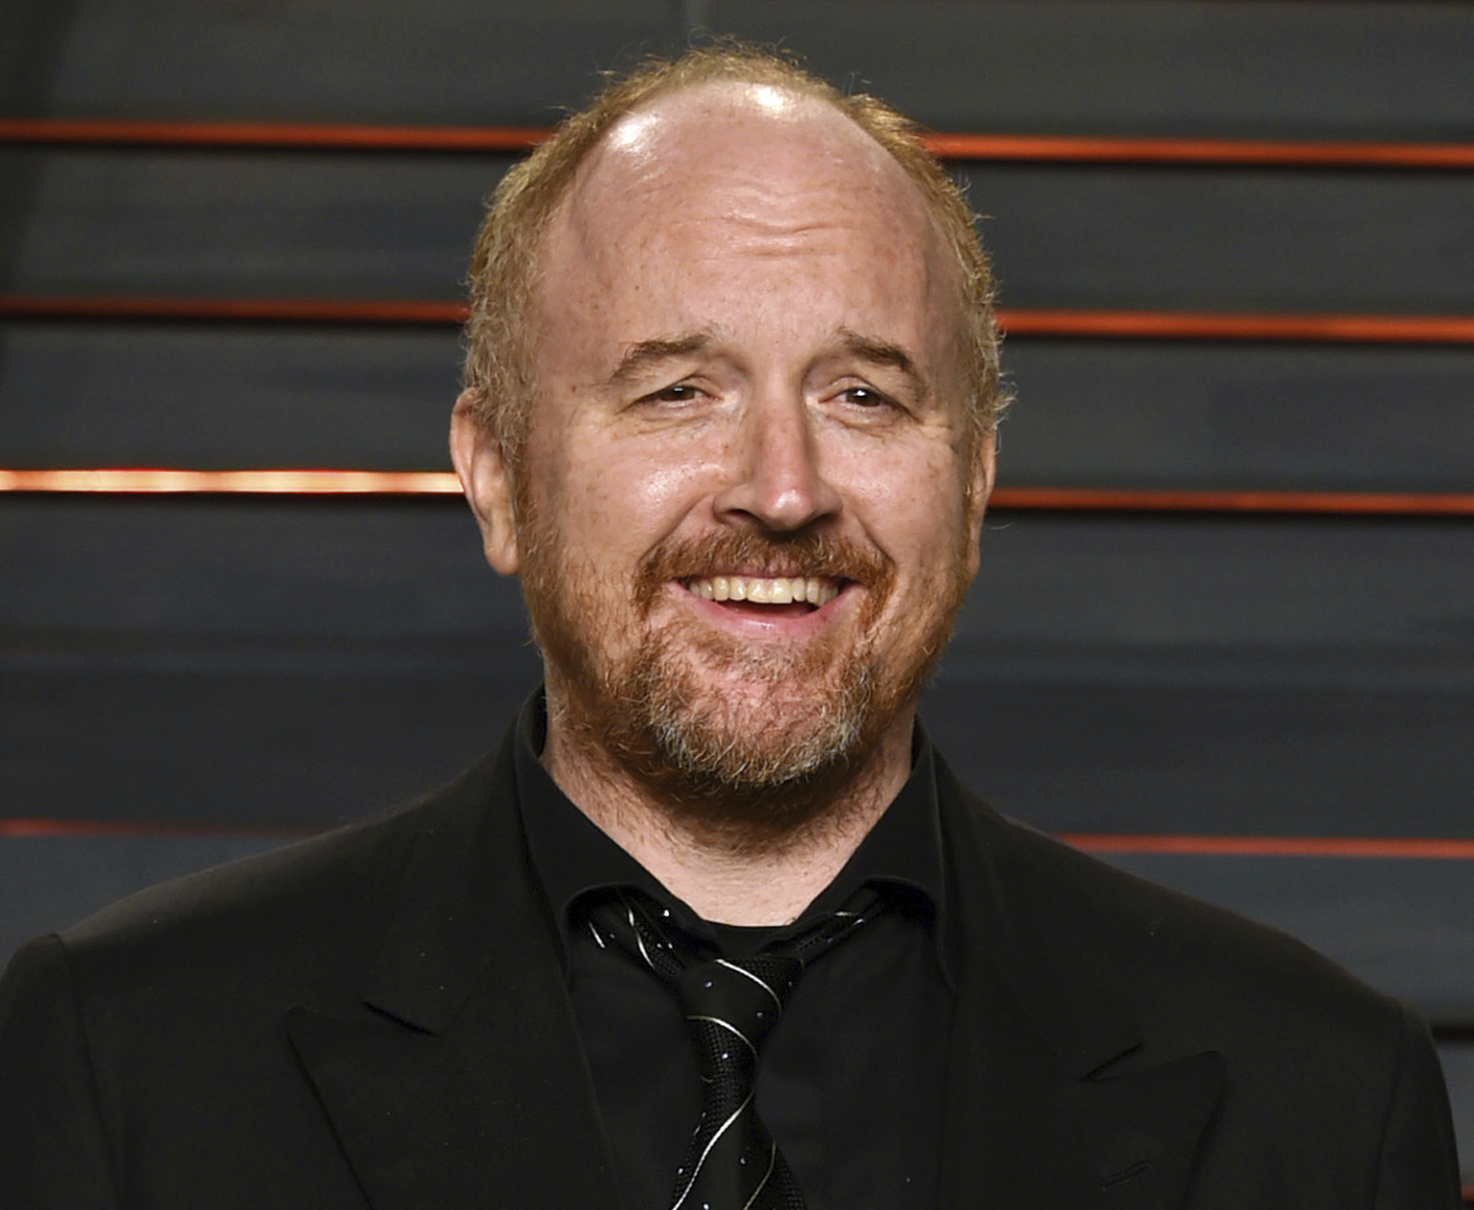 Louis C.K. has confessed. Now it’s time for contrition. | America Magazine